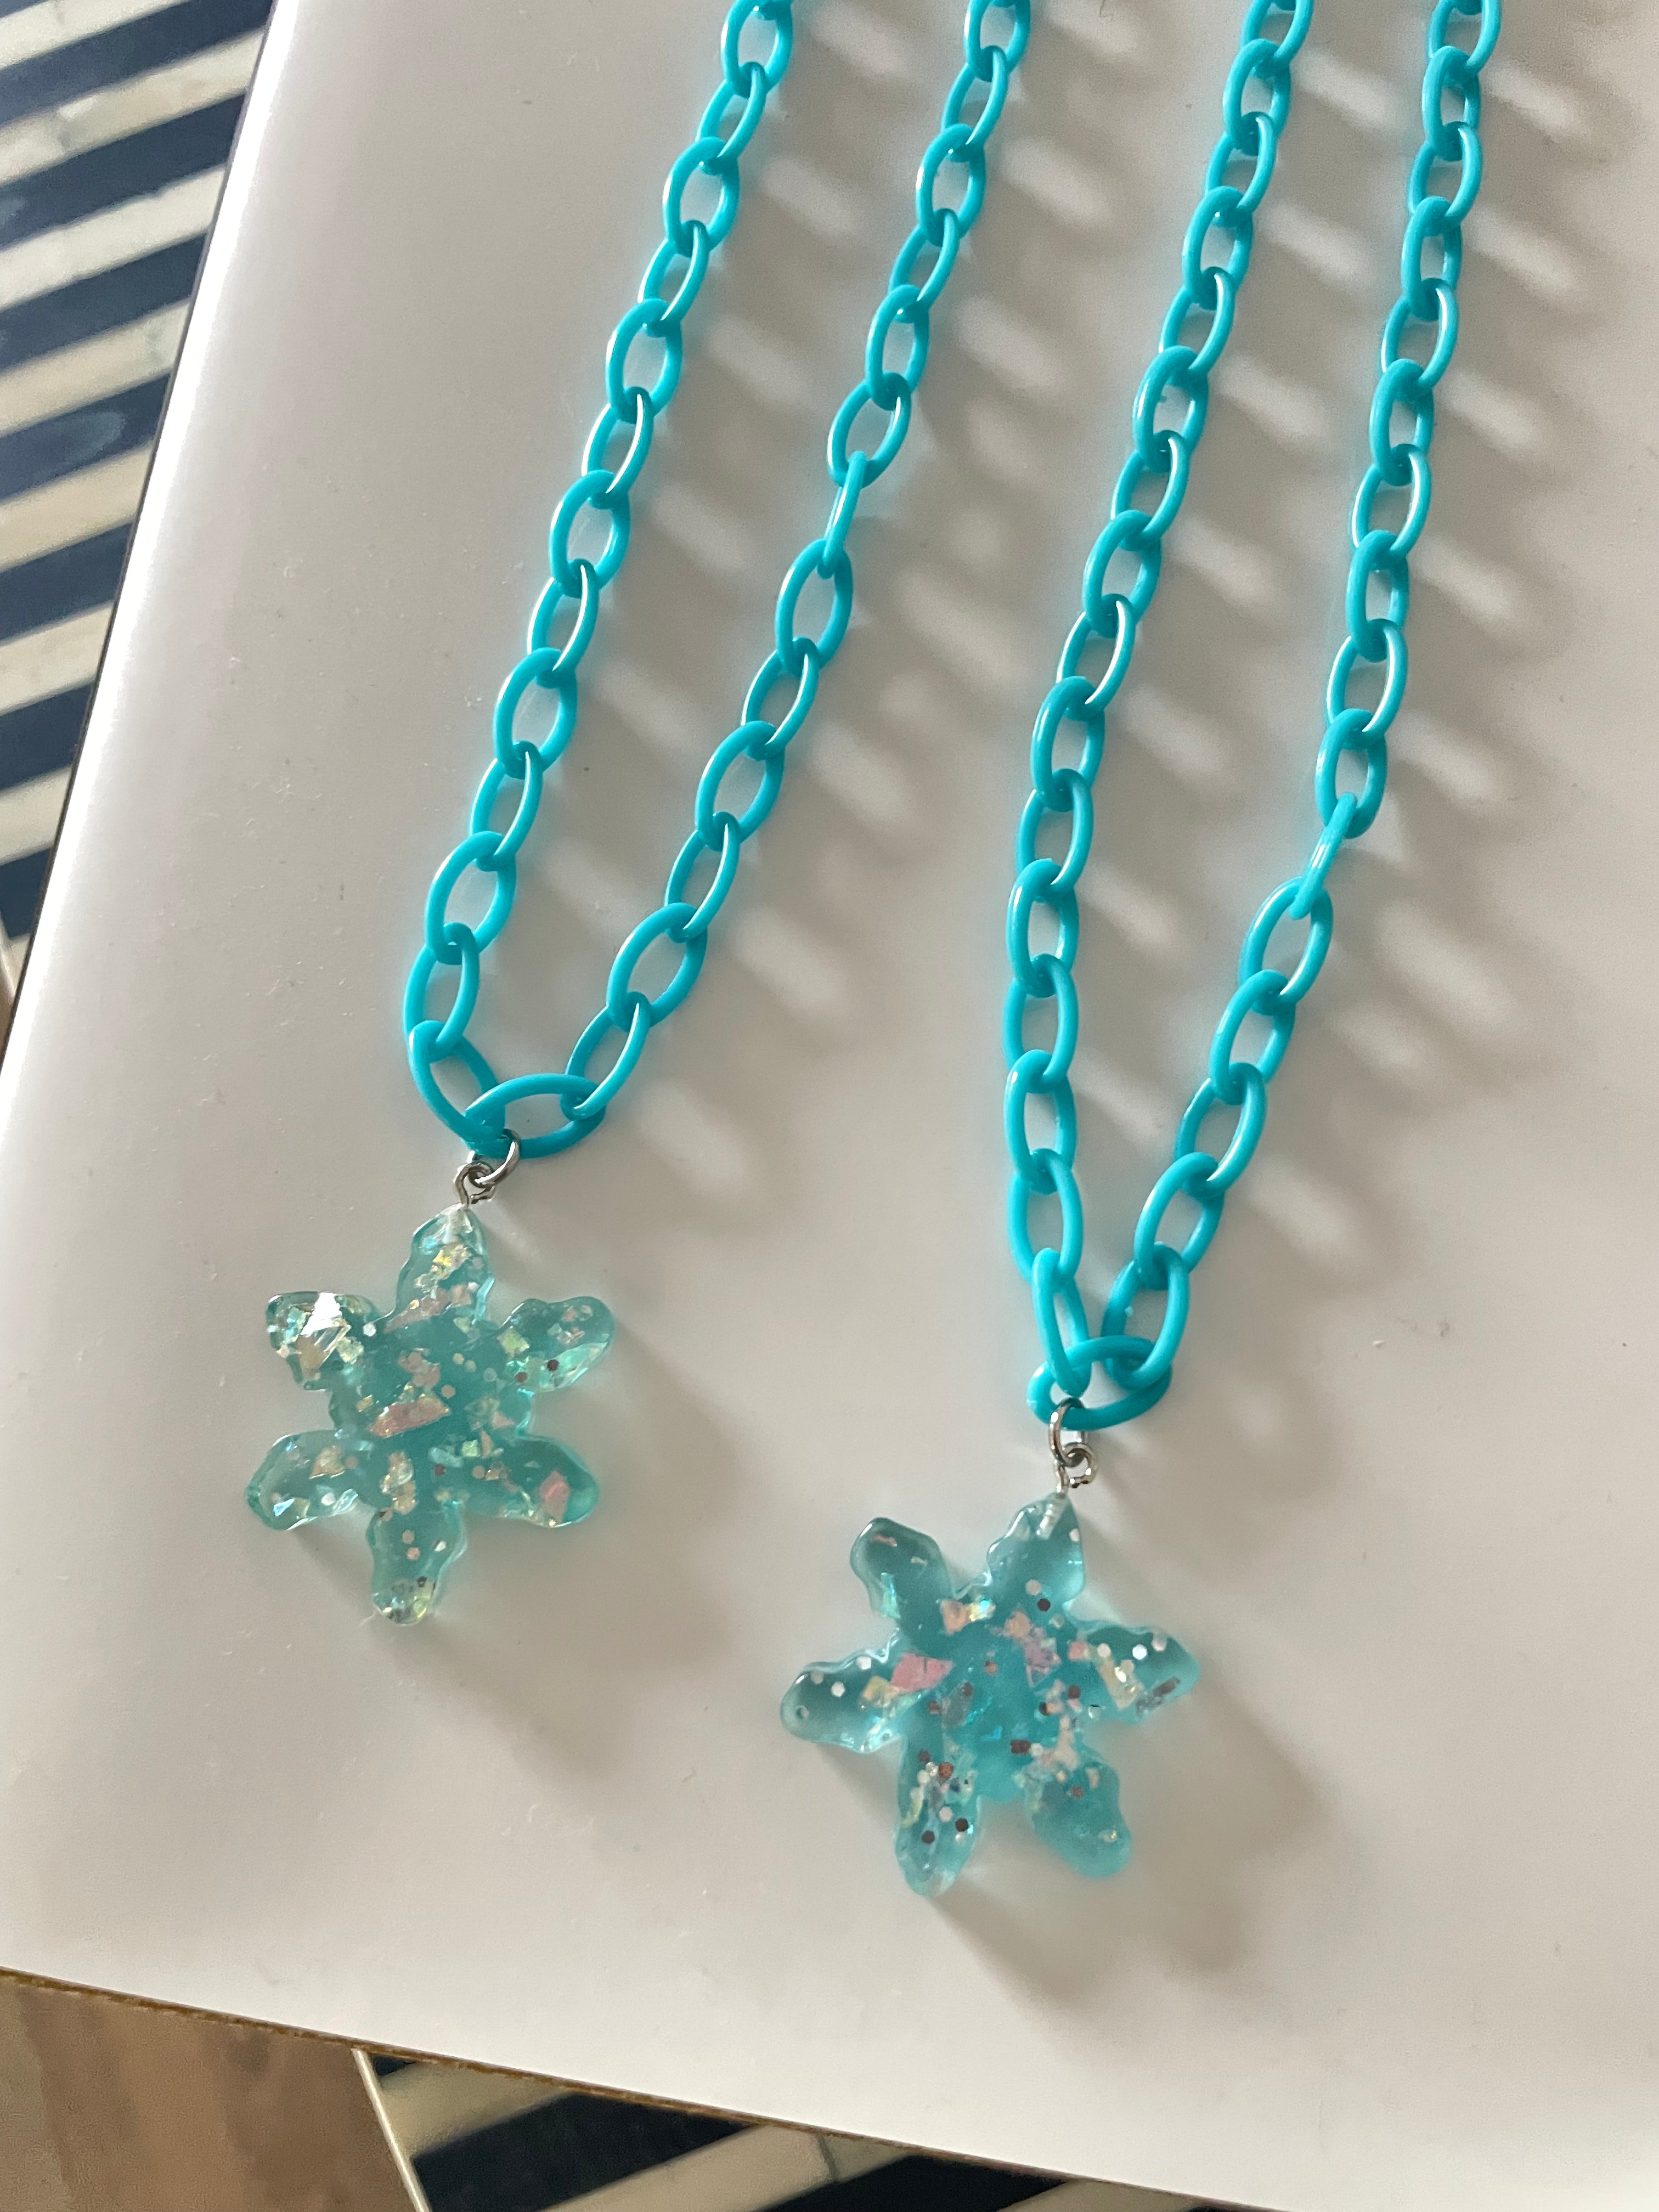 Frozen Characters and Snowflake Necklaces